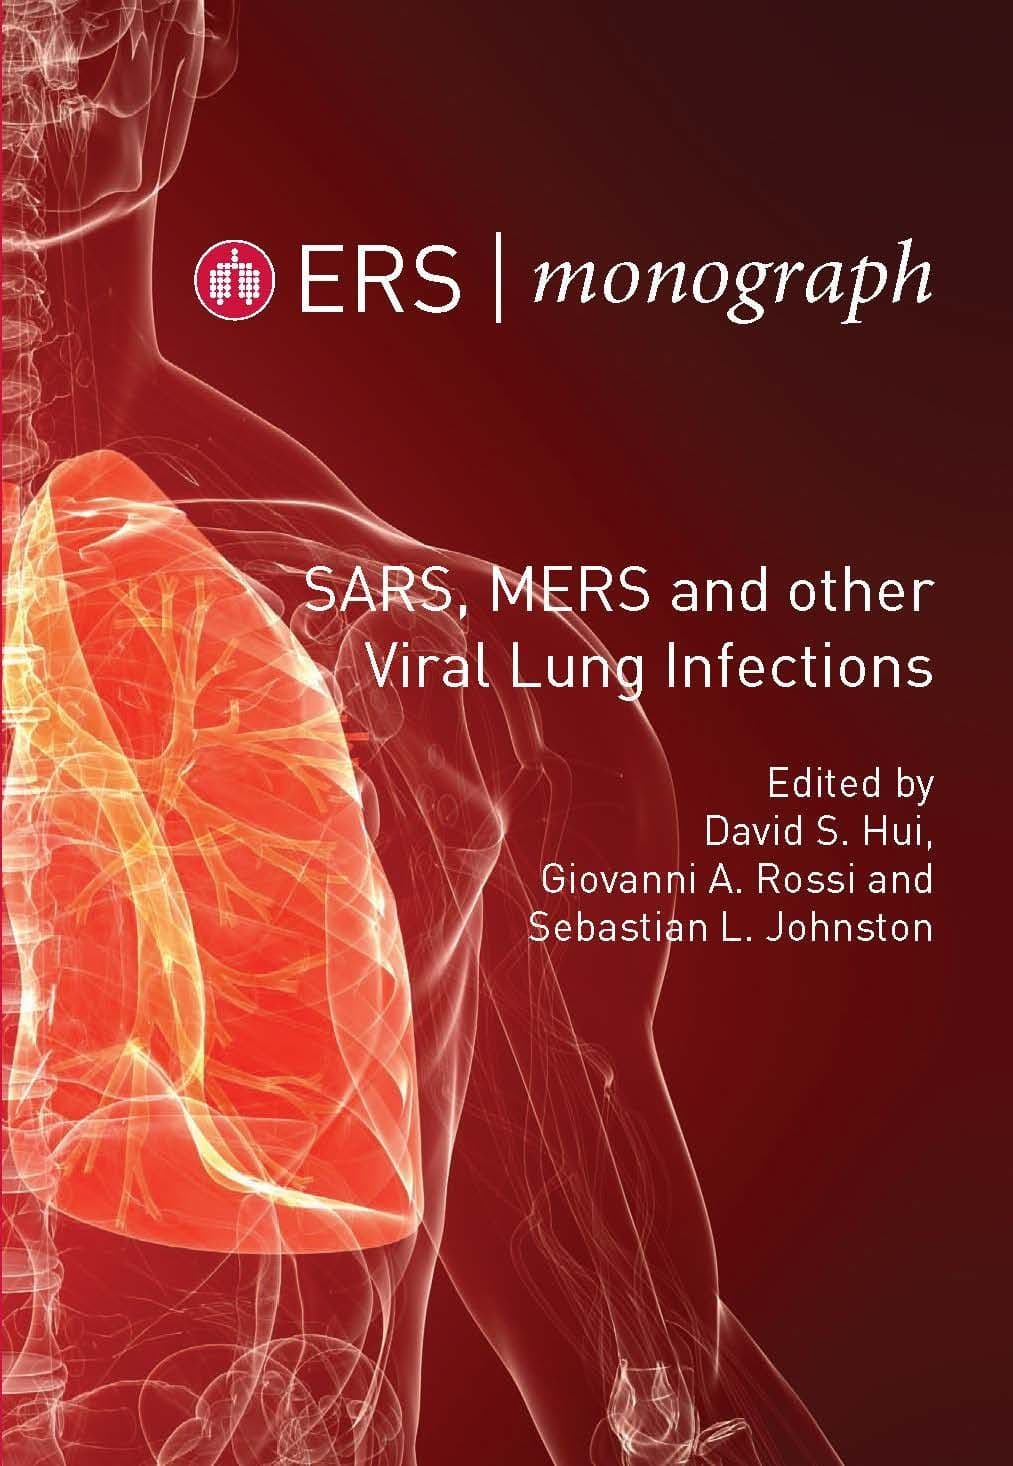 SARS, MERS and other Viral Lung Infections